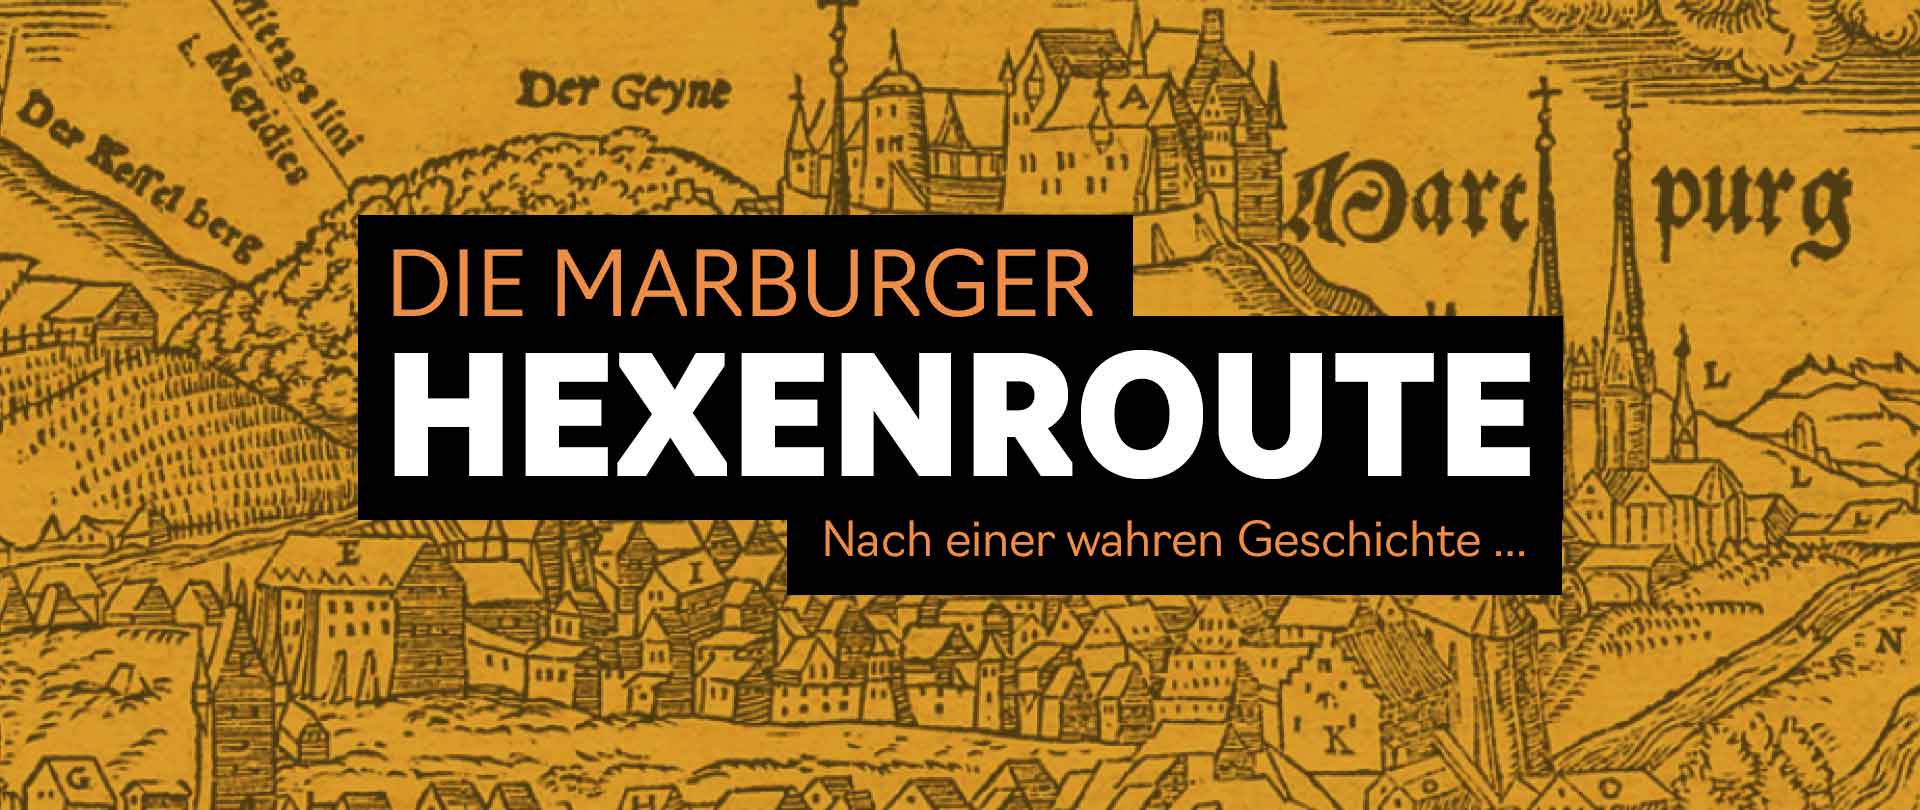 case-marburger-hexenroute-kids-wide